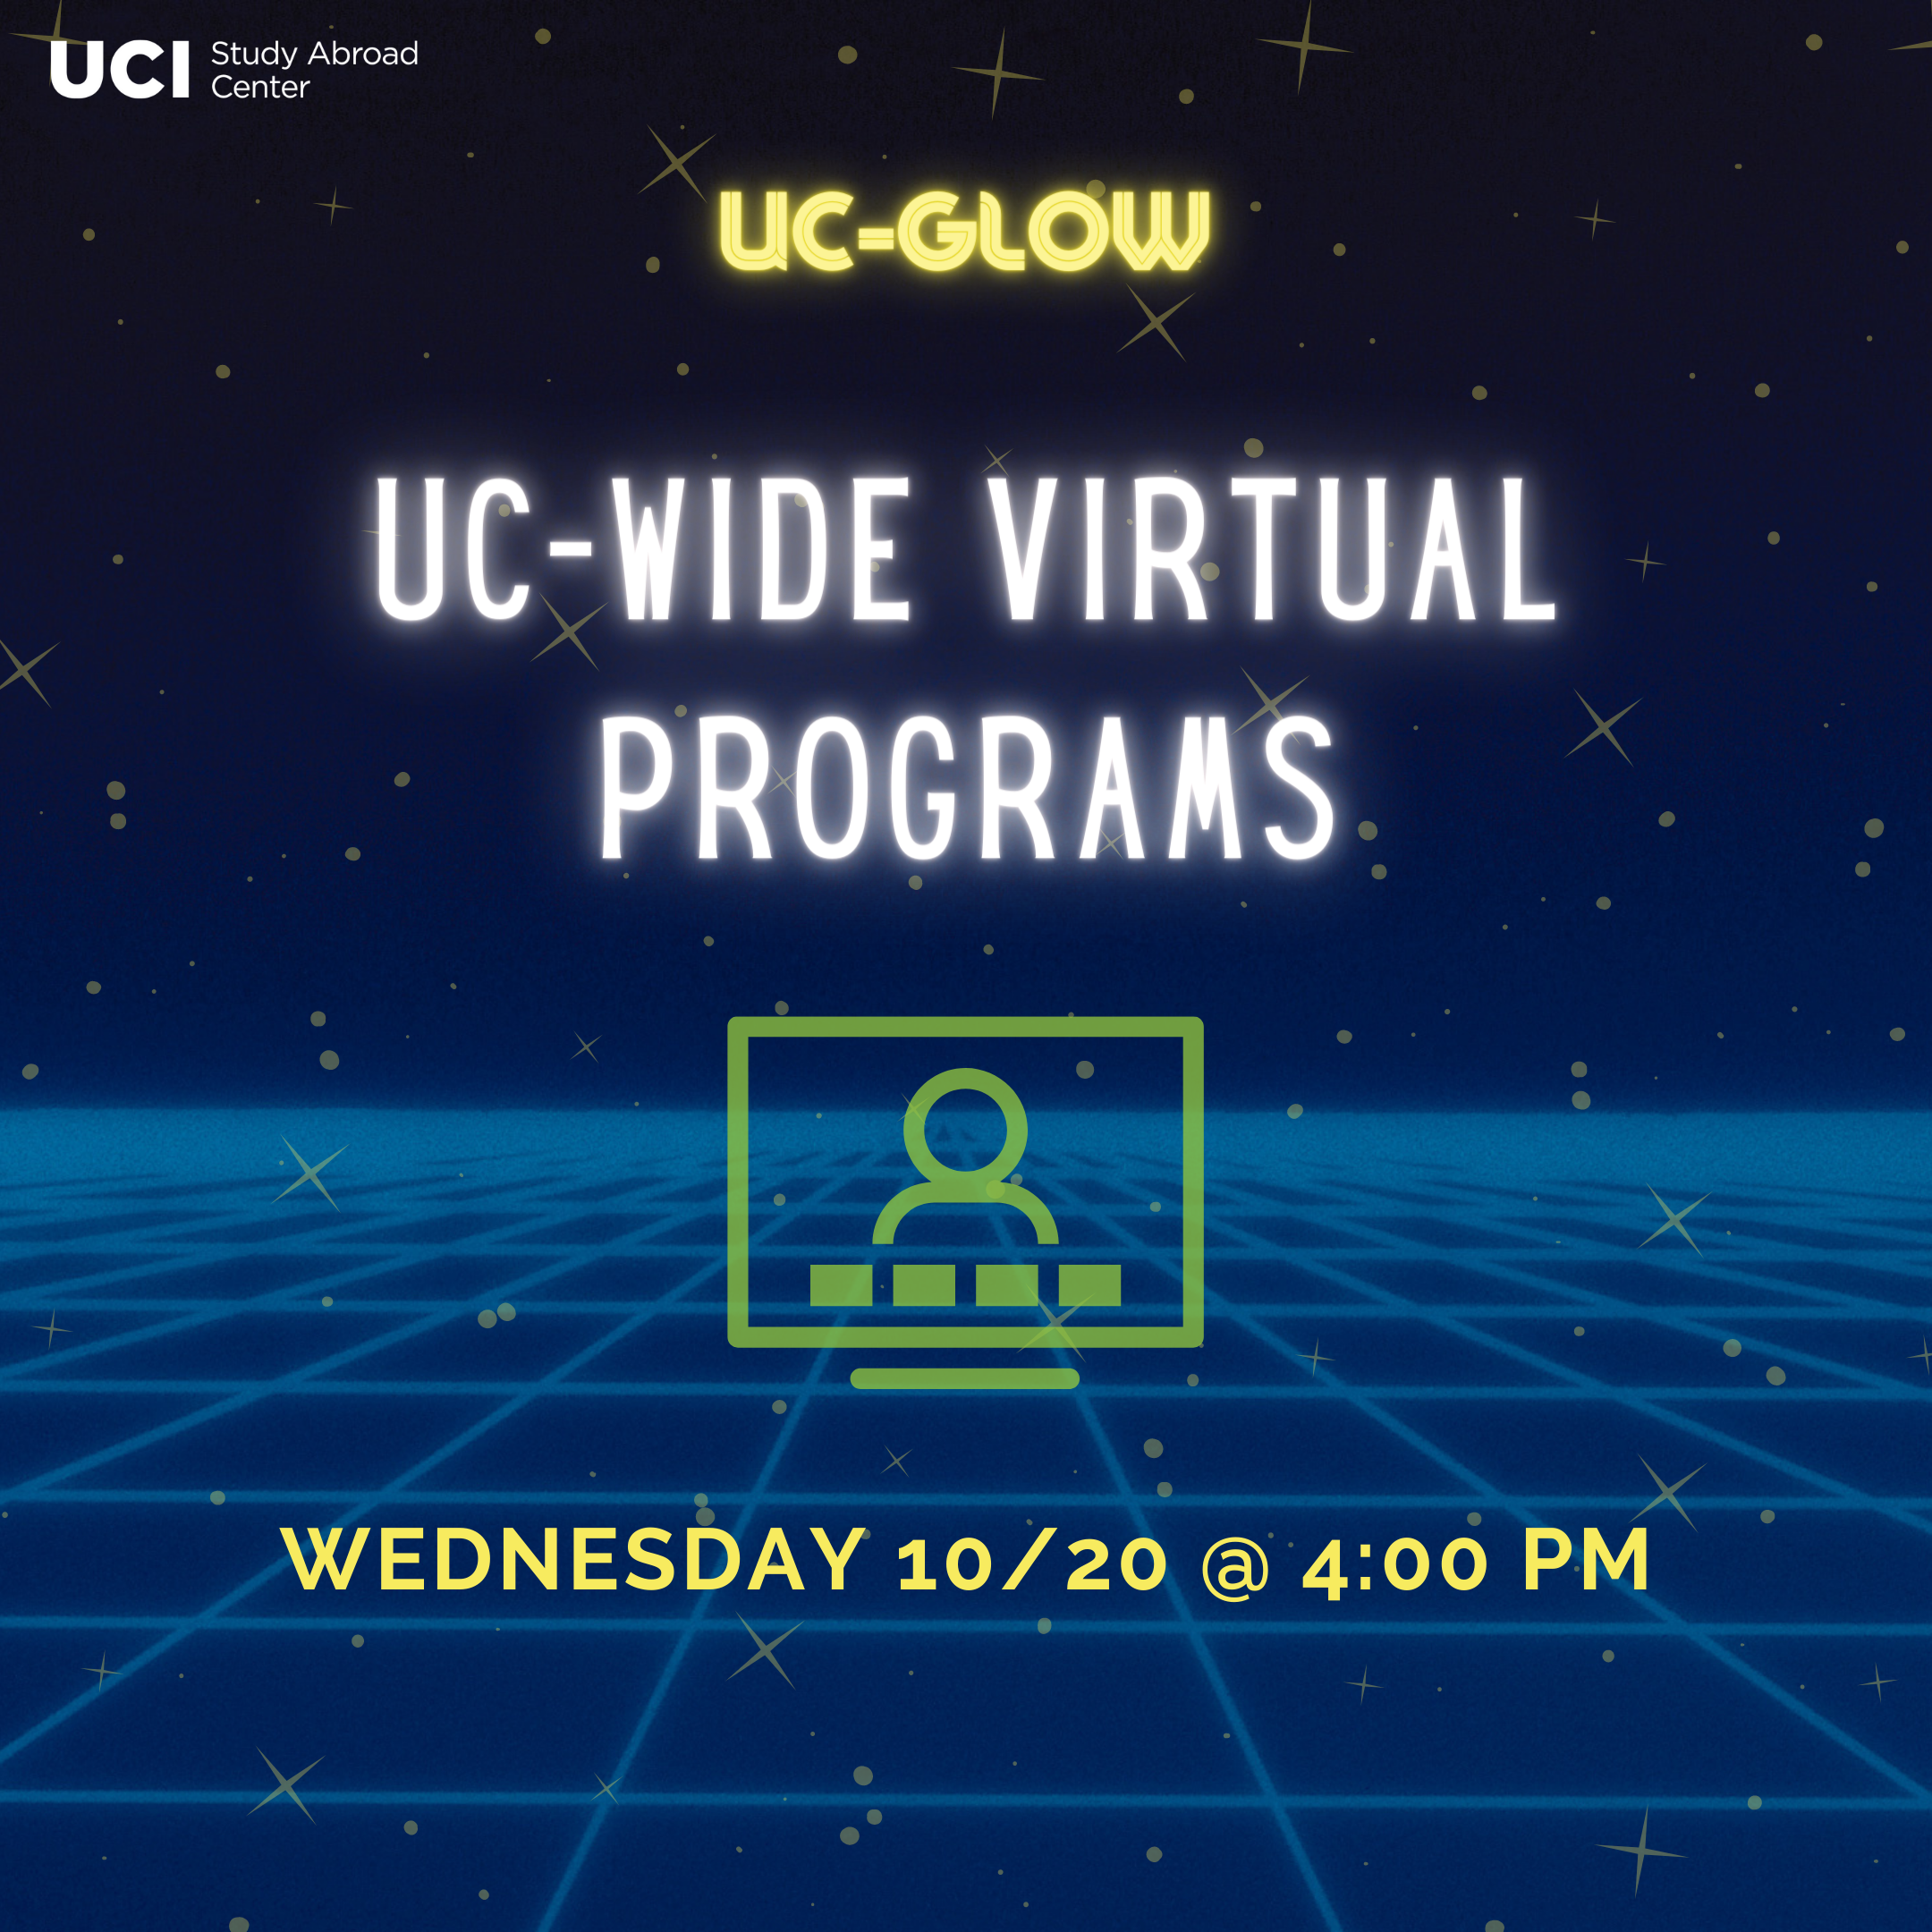 UC-GLOW. UC-wide virtual programs. Wednesday October 20th at 4:00pm.